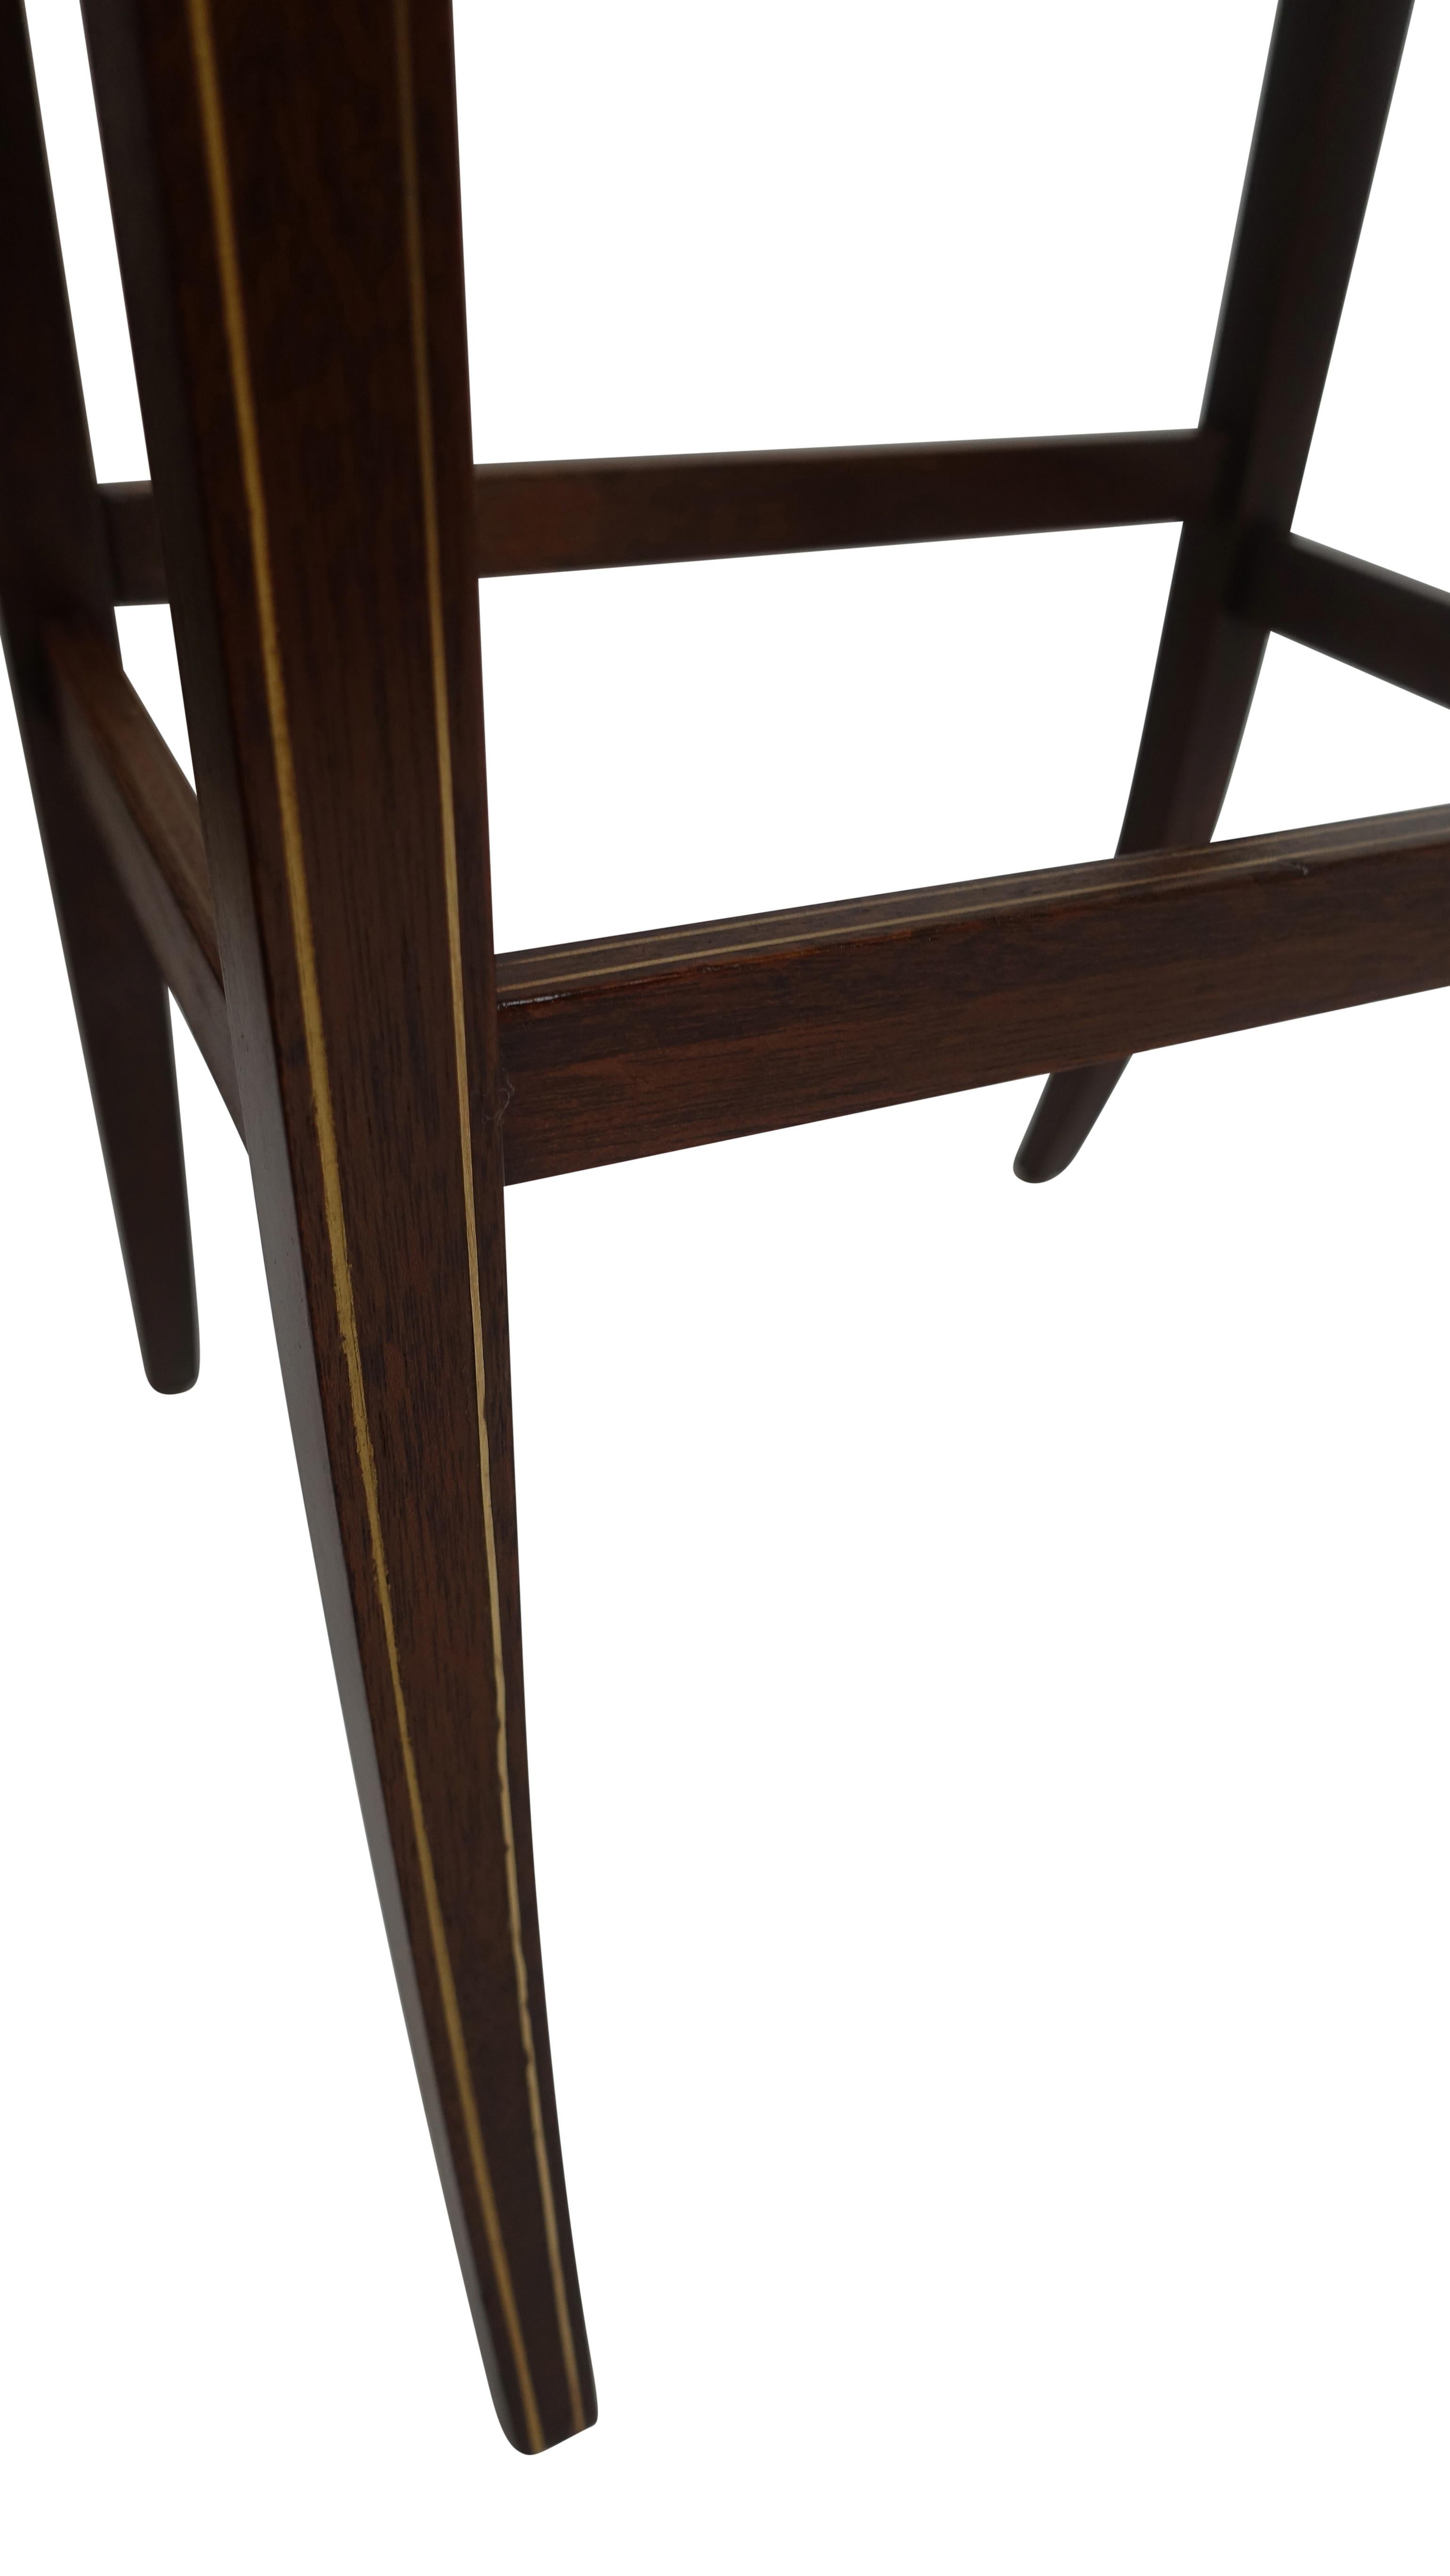 Set of Four Mahogany Nesting Tables with Brass Inlay and Trim, Mid-20th Century For Sale 2